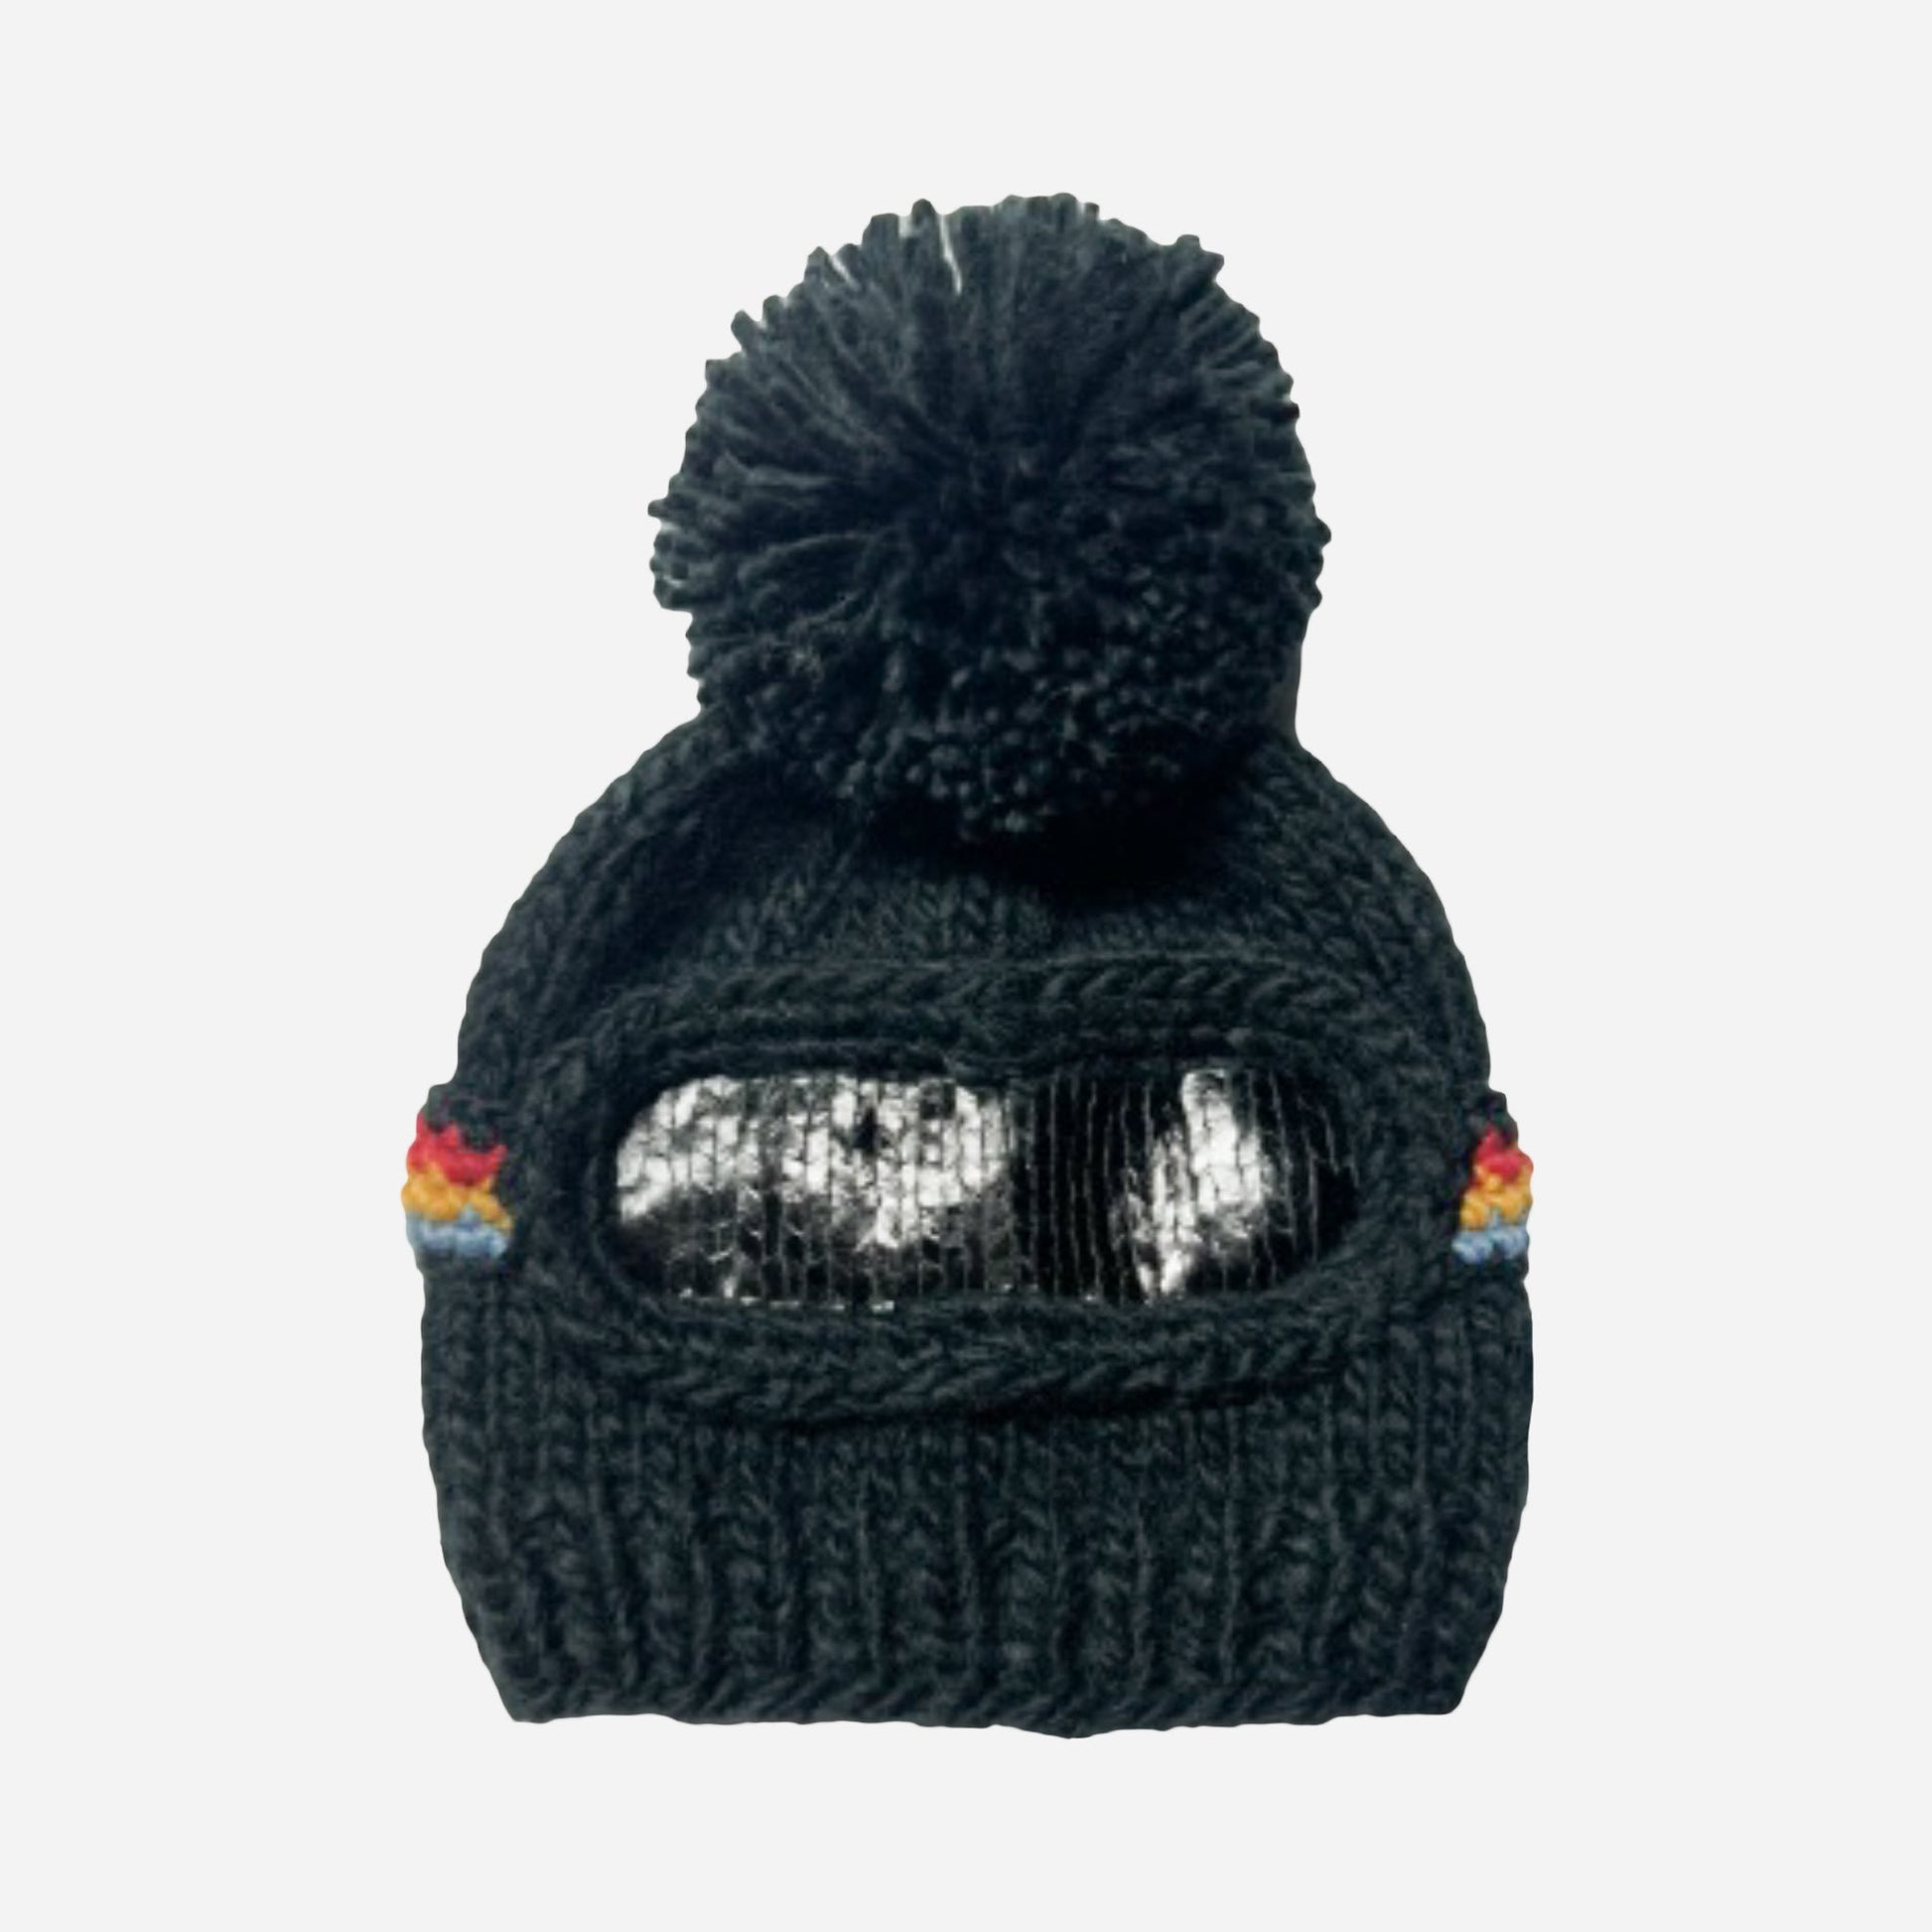 Hand-Knit Black Ski Goggle Hat for Kids: The Perfect Gift for Chilly ...